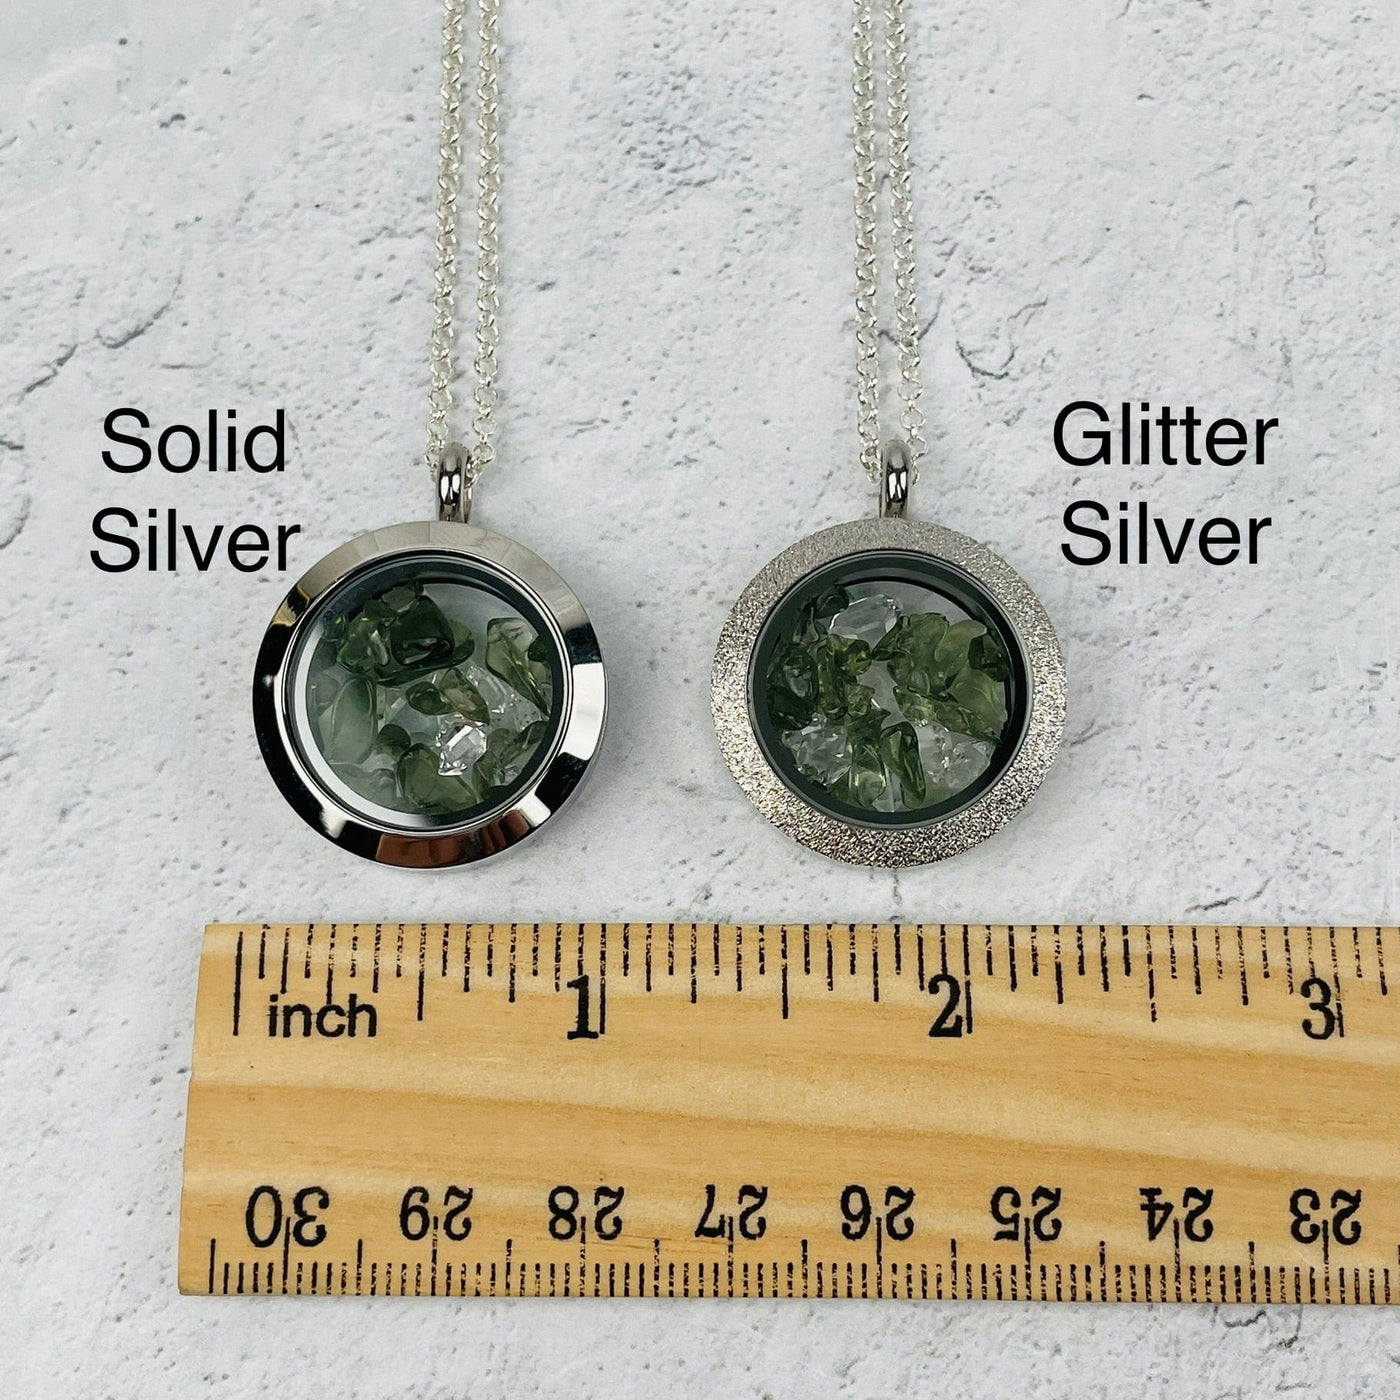 pendants next to a ruler for size reference. available in solid silver or glitter silver 